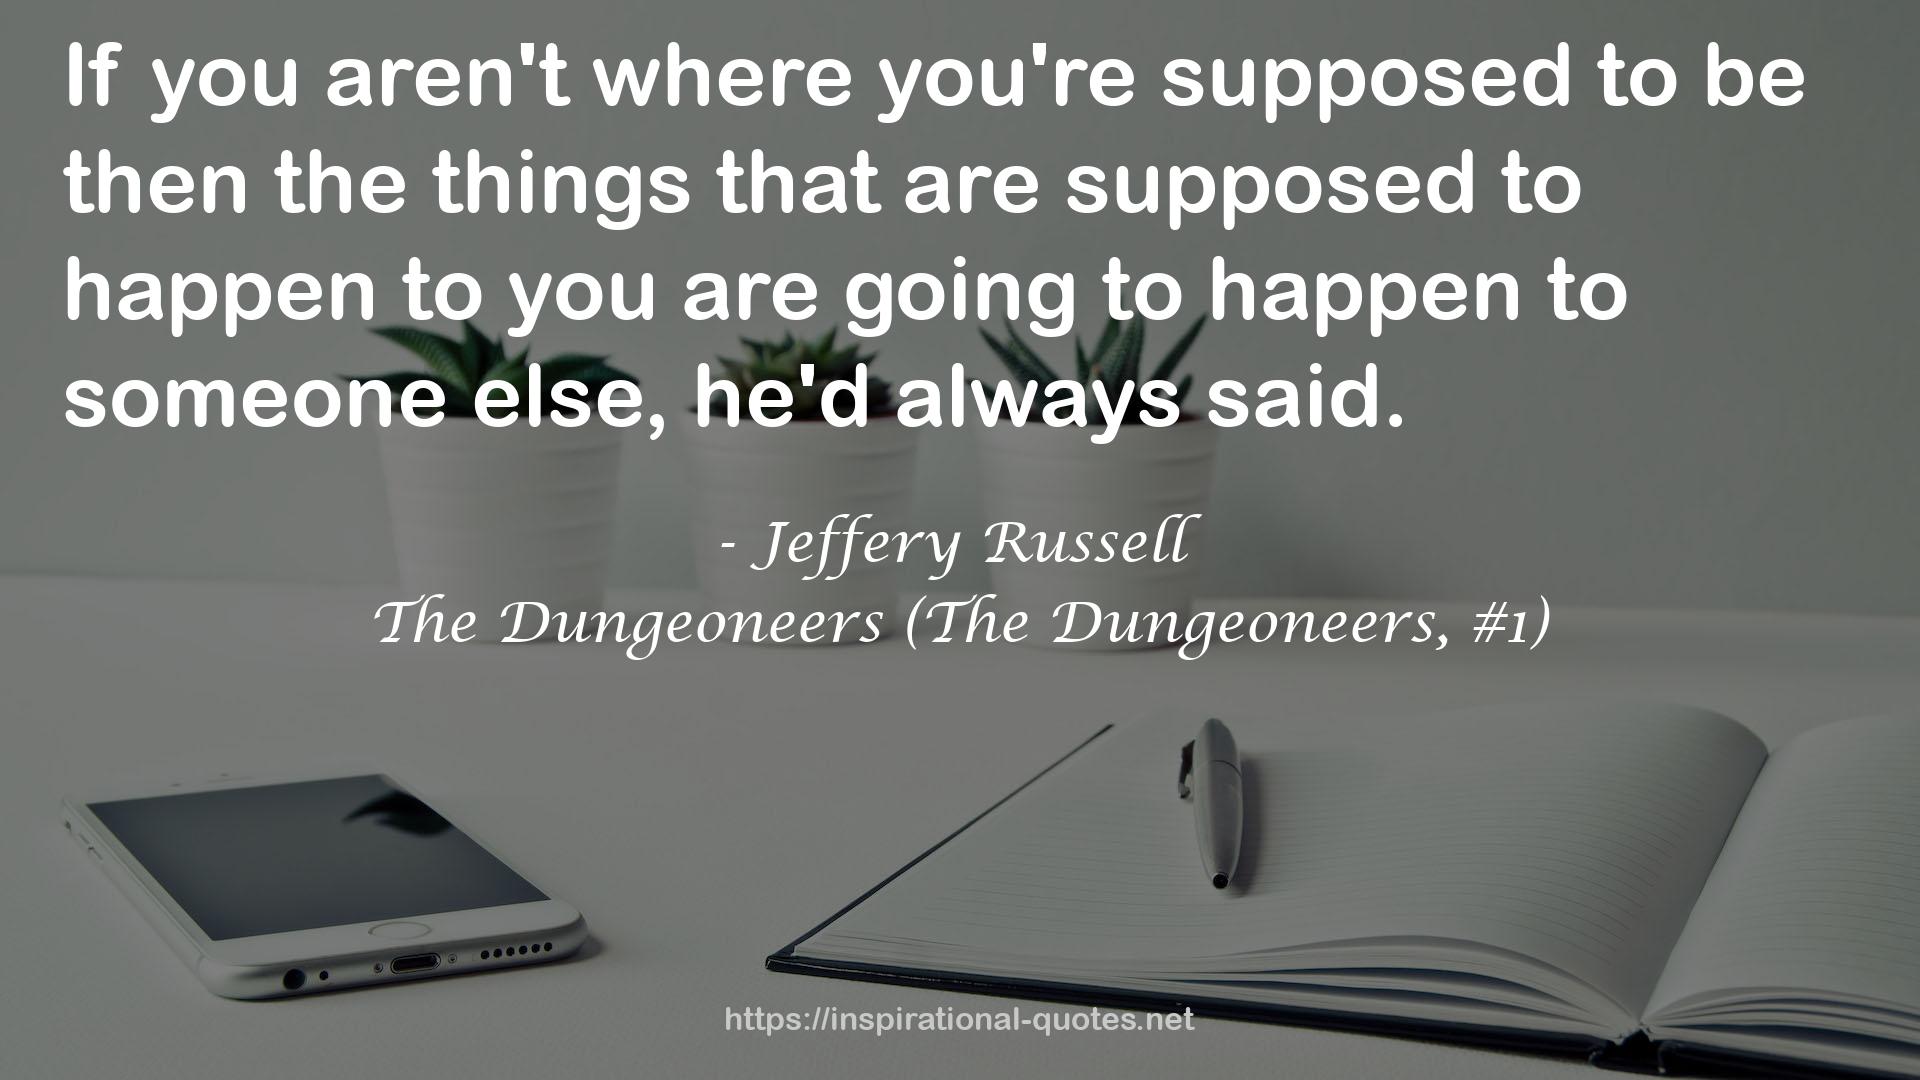 The Dungeoneers (The Dungeoneers, #1) QUOTES